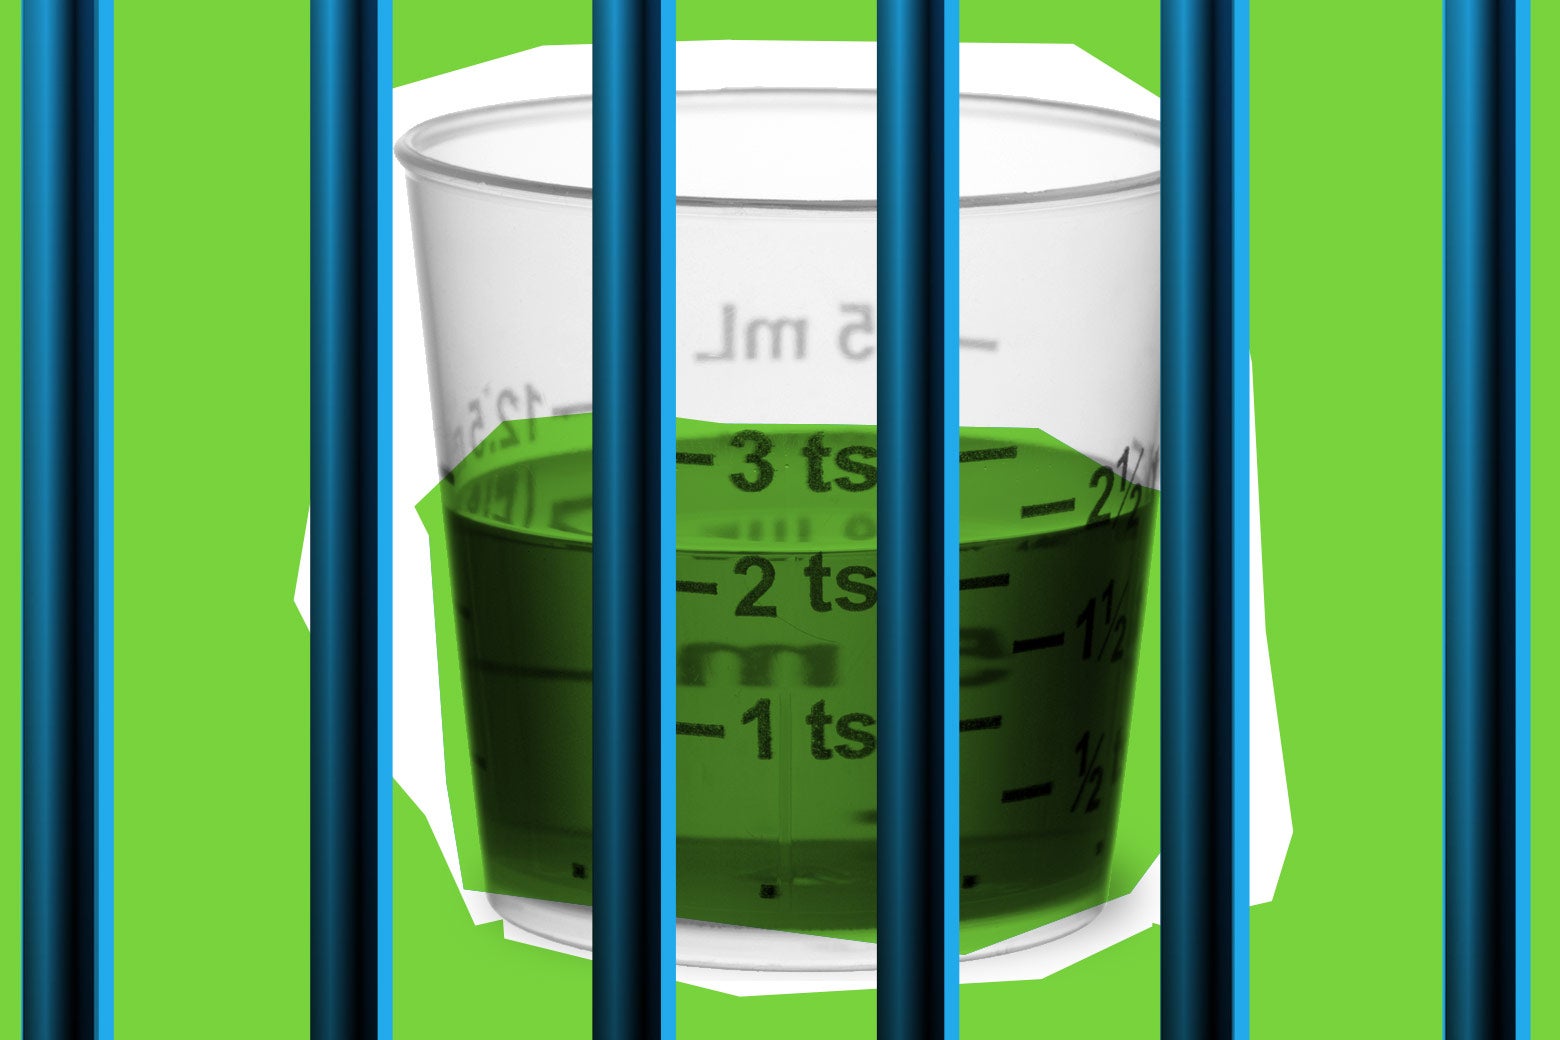 A cup containing a dosage of methadone behind bars.